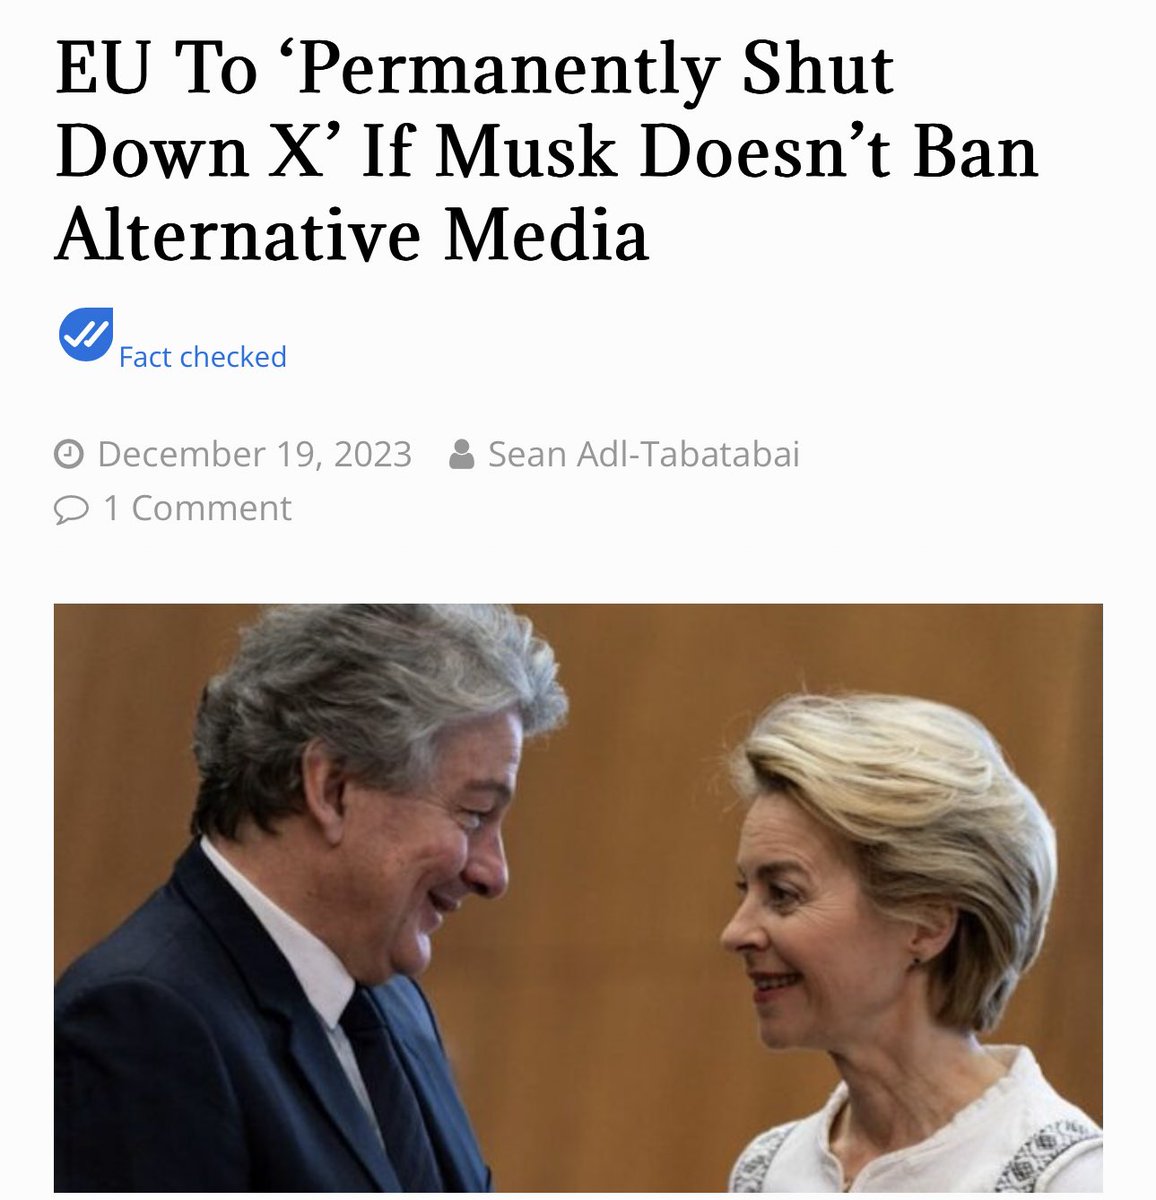 The European Union has vowed to permanently shut down X if Elon Musk doesn’t immediately ban alternative media from the platform. Because EU won’t survive with free speech.